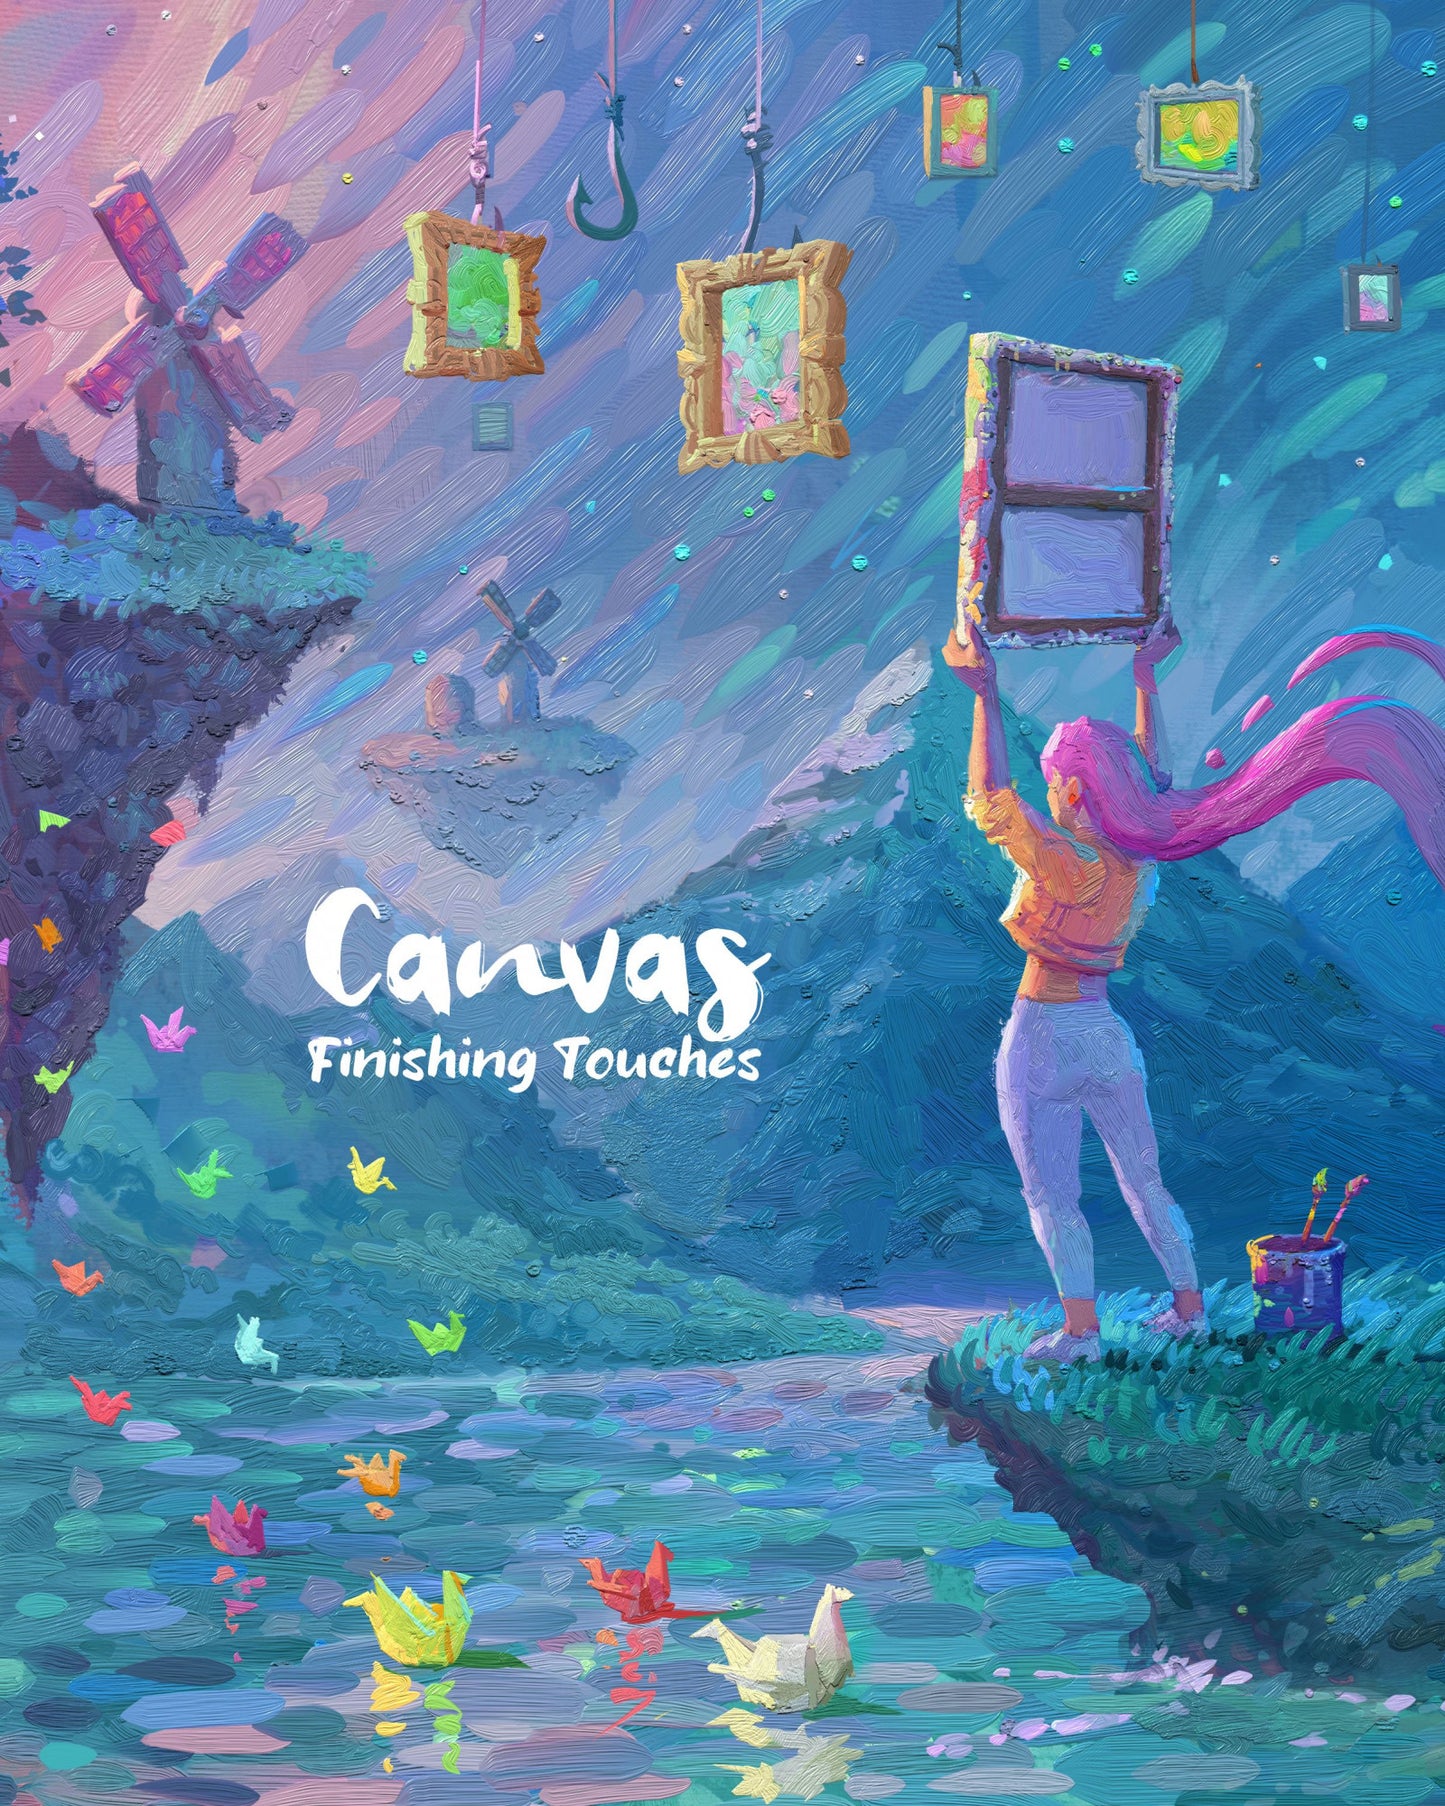 Canvas finishing touches board game expansion box cover art